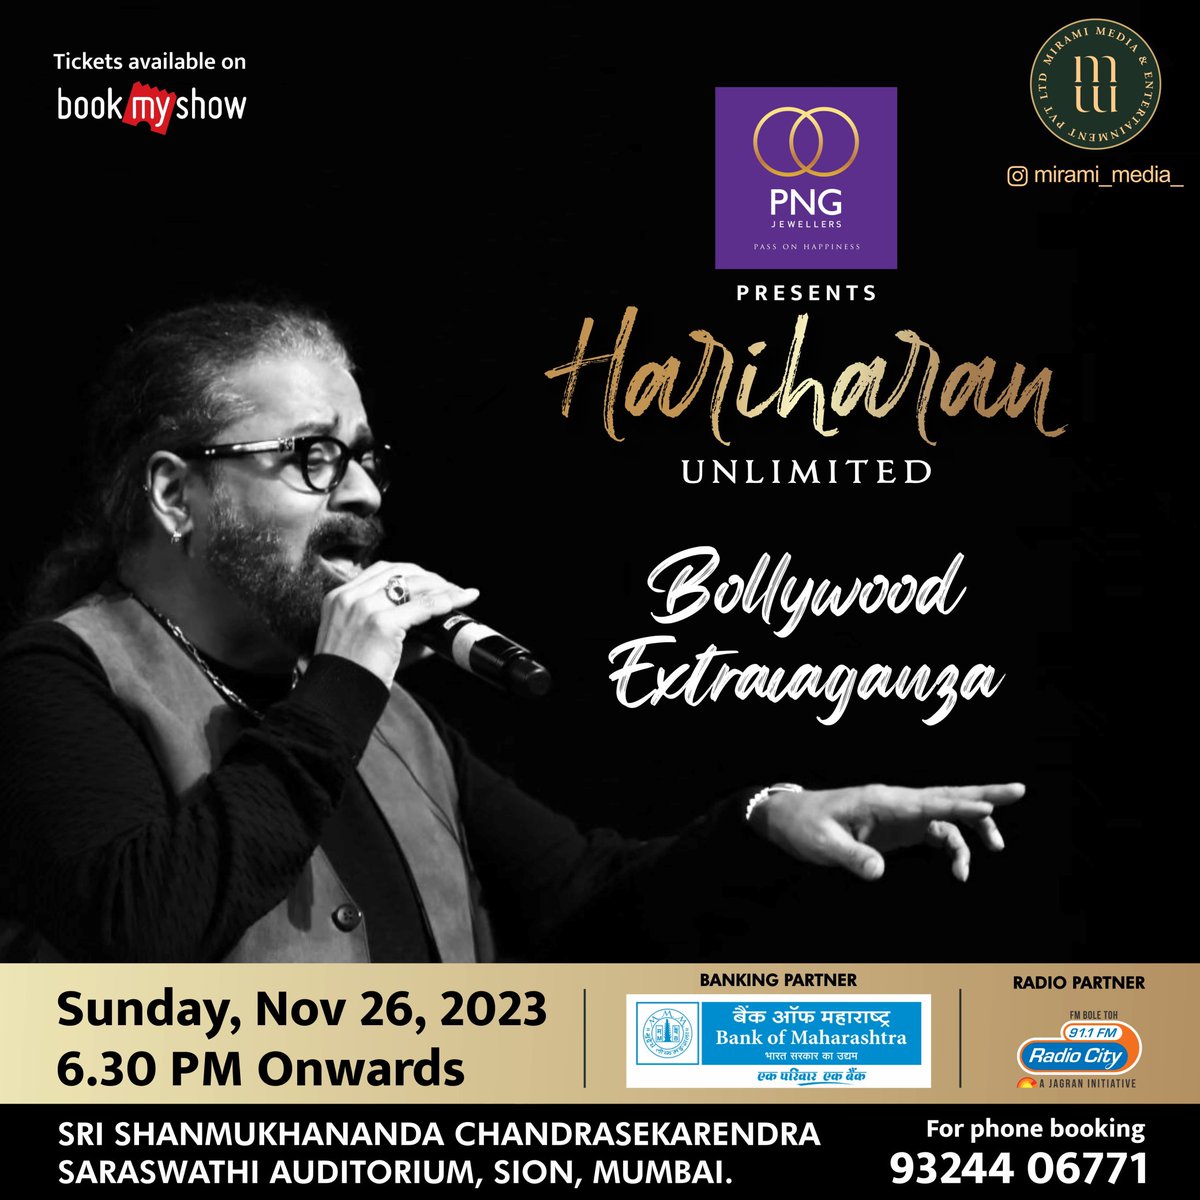 See you in 2 days #Mumbai 💥 Tickets: in.bookmyshow.com/events/harihar… #HariharanLive